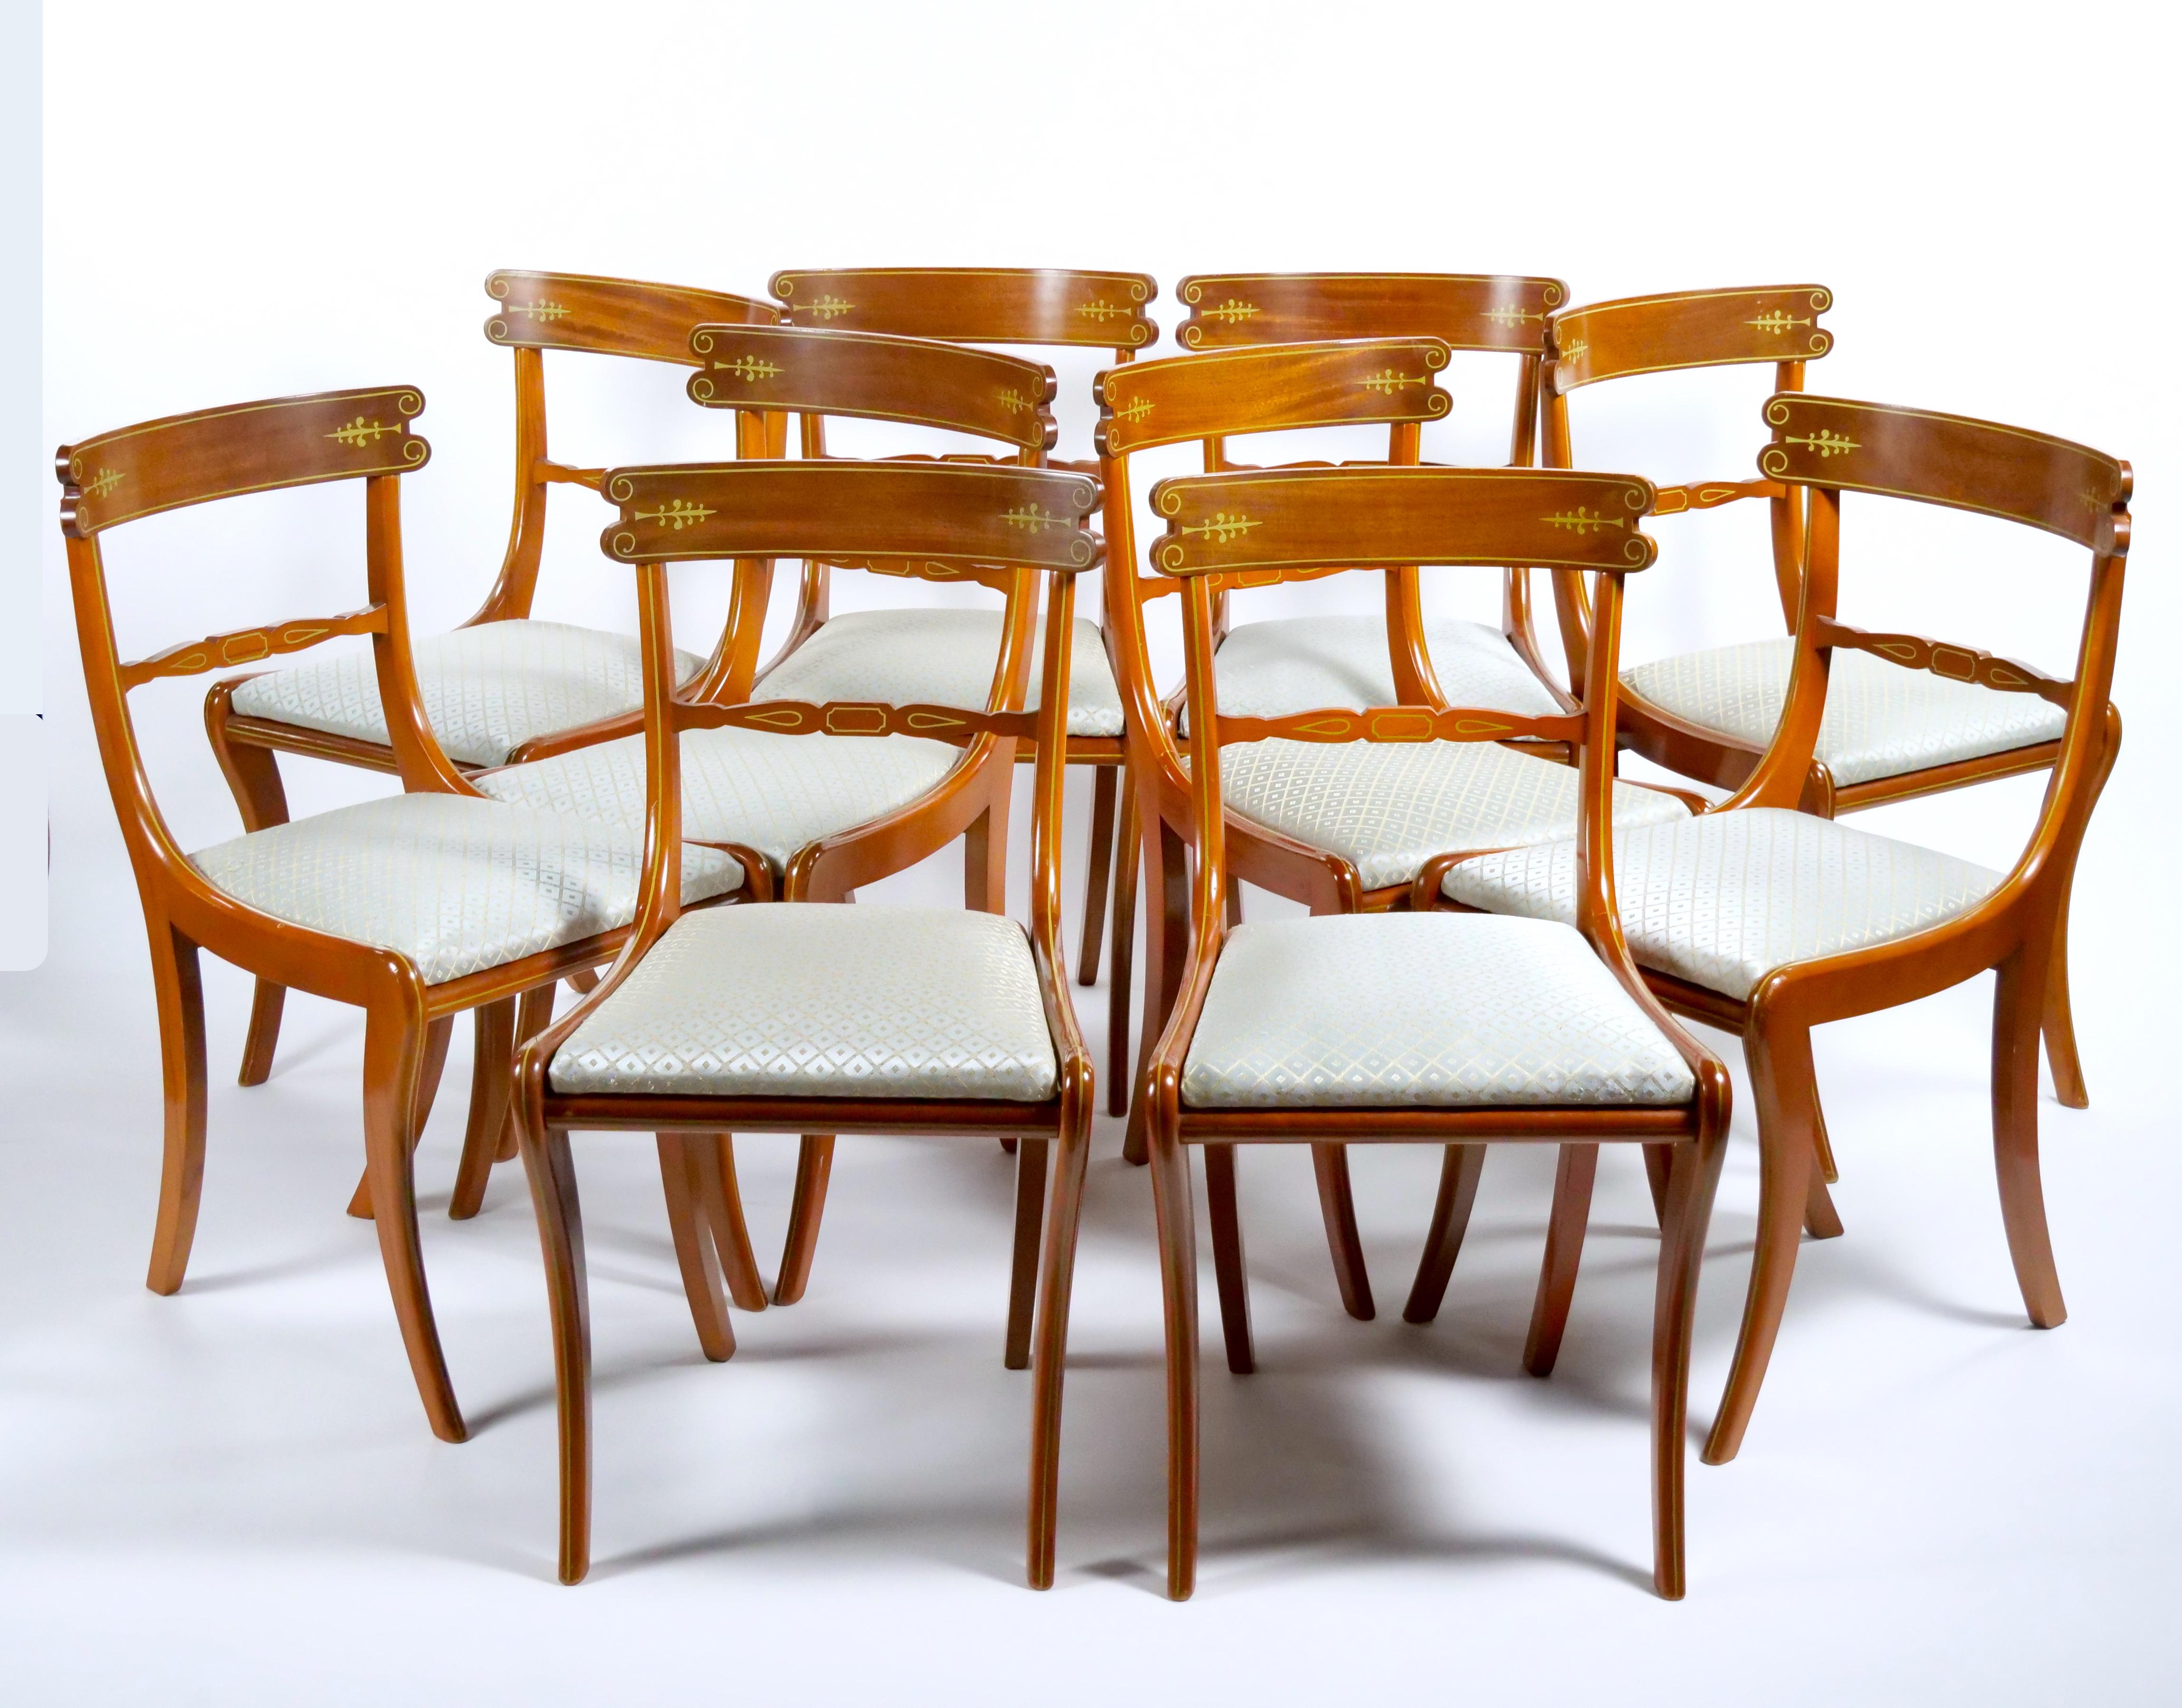 Enhance your dining experience with this Early 20th Century Italian Mahogany Framed Dining Room Chair Set, a beautifully crafted ensemble that accommodates ten people and adds a touch of sophistication to your dining space. The combination of the